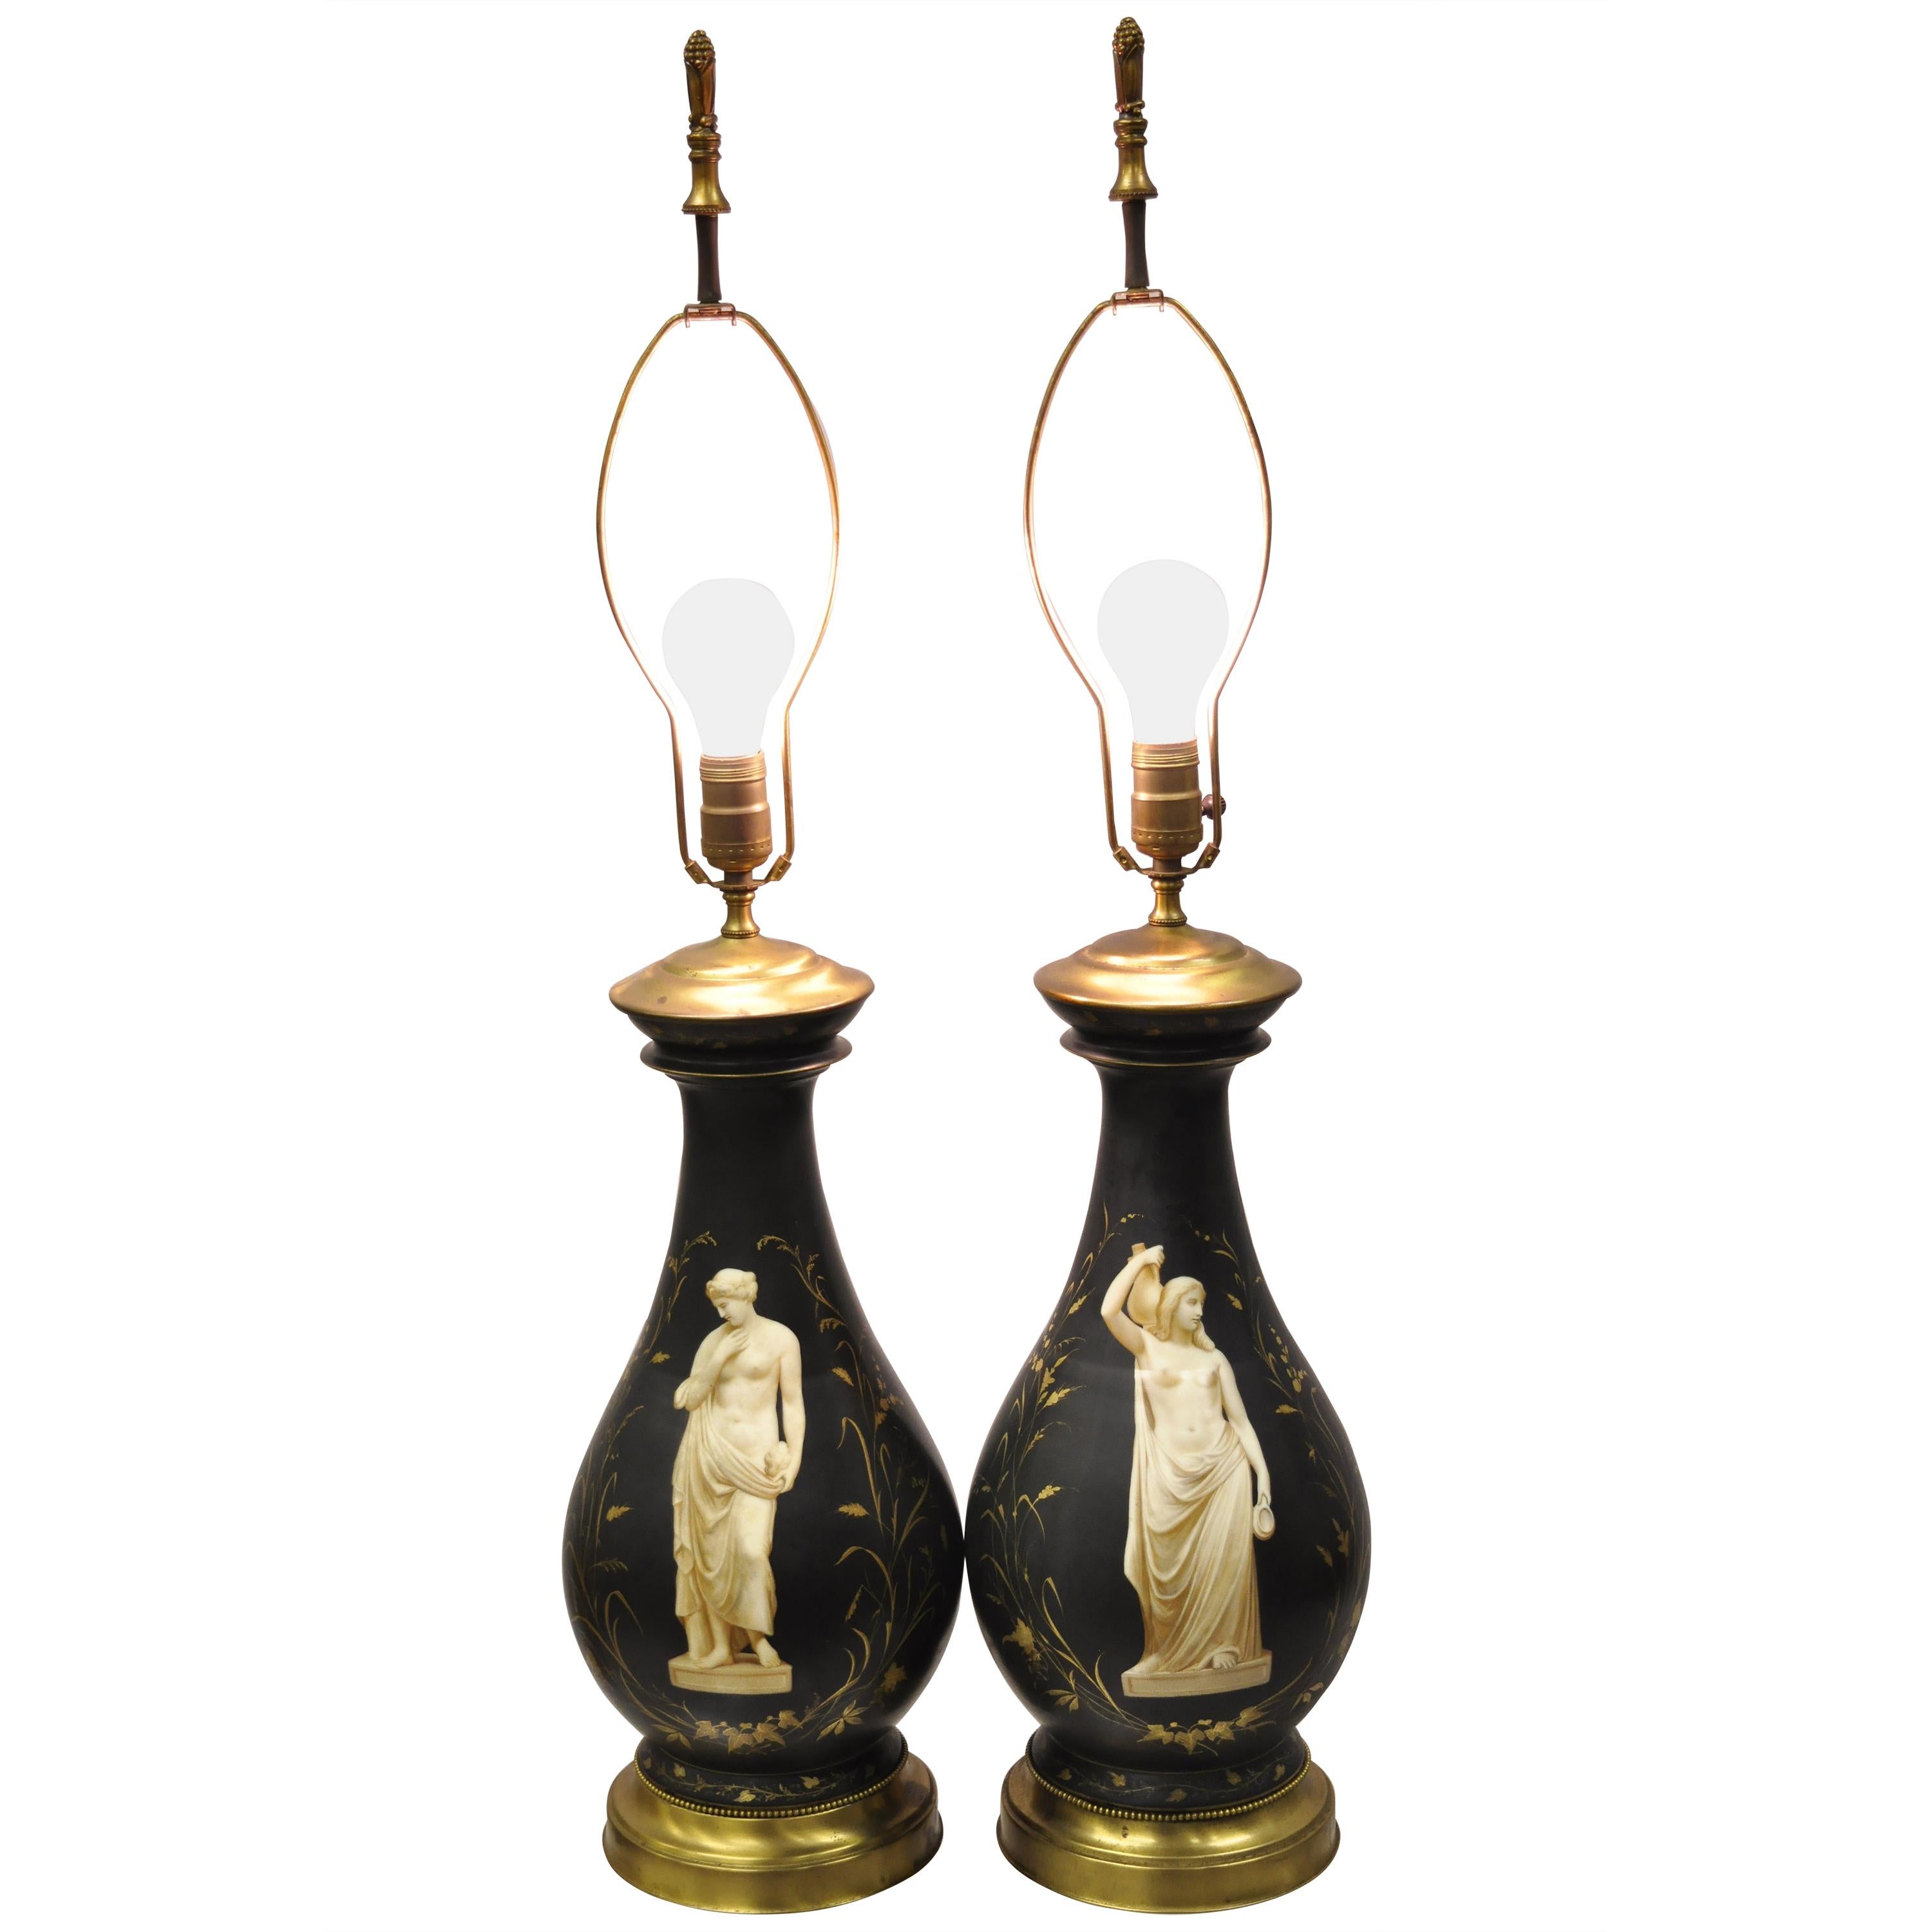 Antique French Neoclassical Black Porcelain Classical Bulbous Table Lamps, Pair For Sale